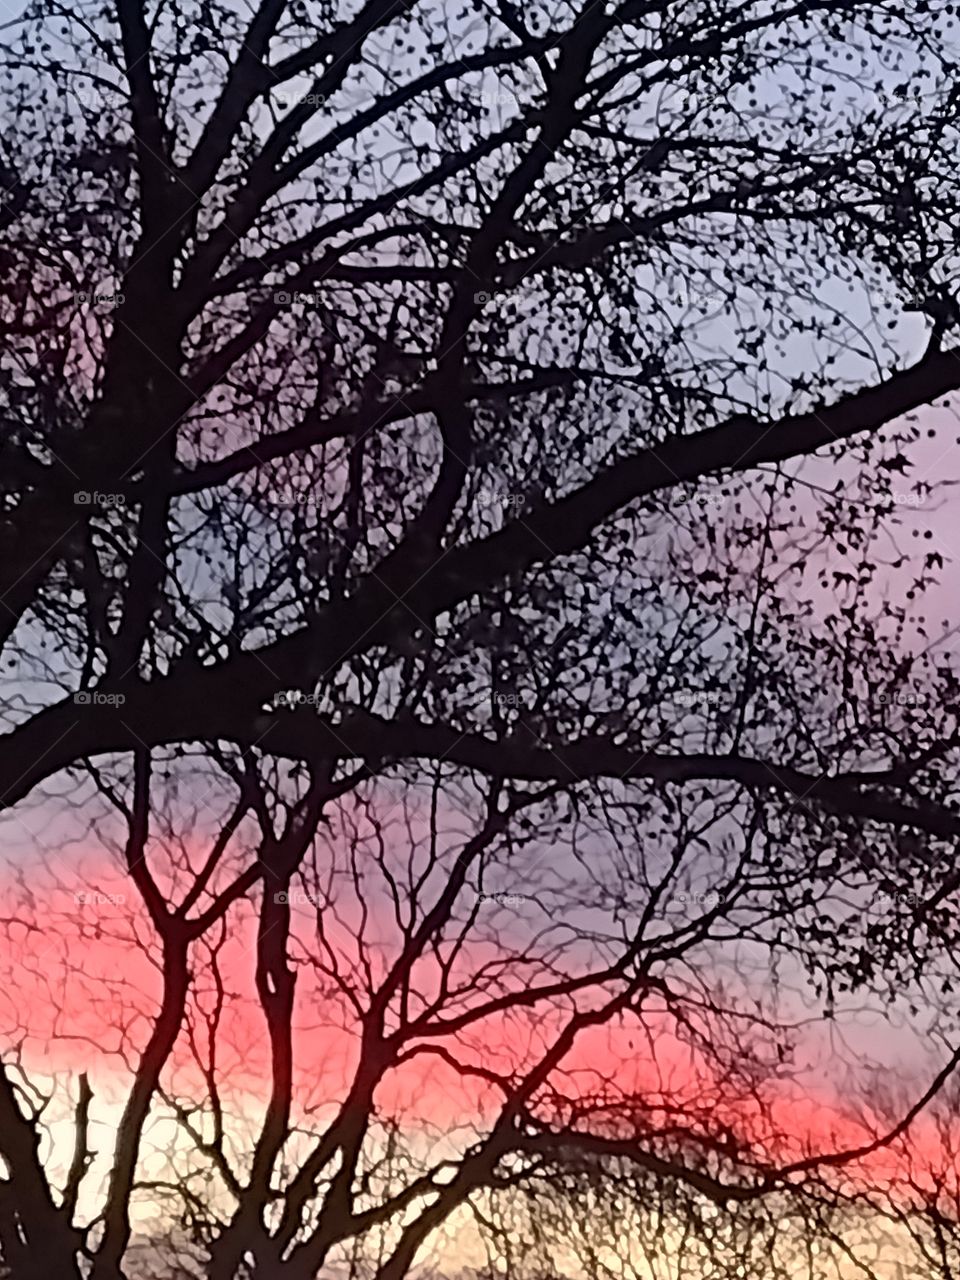 Unfiltered, beautiful, lovely sunset with trees